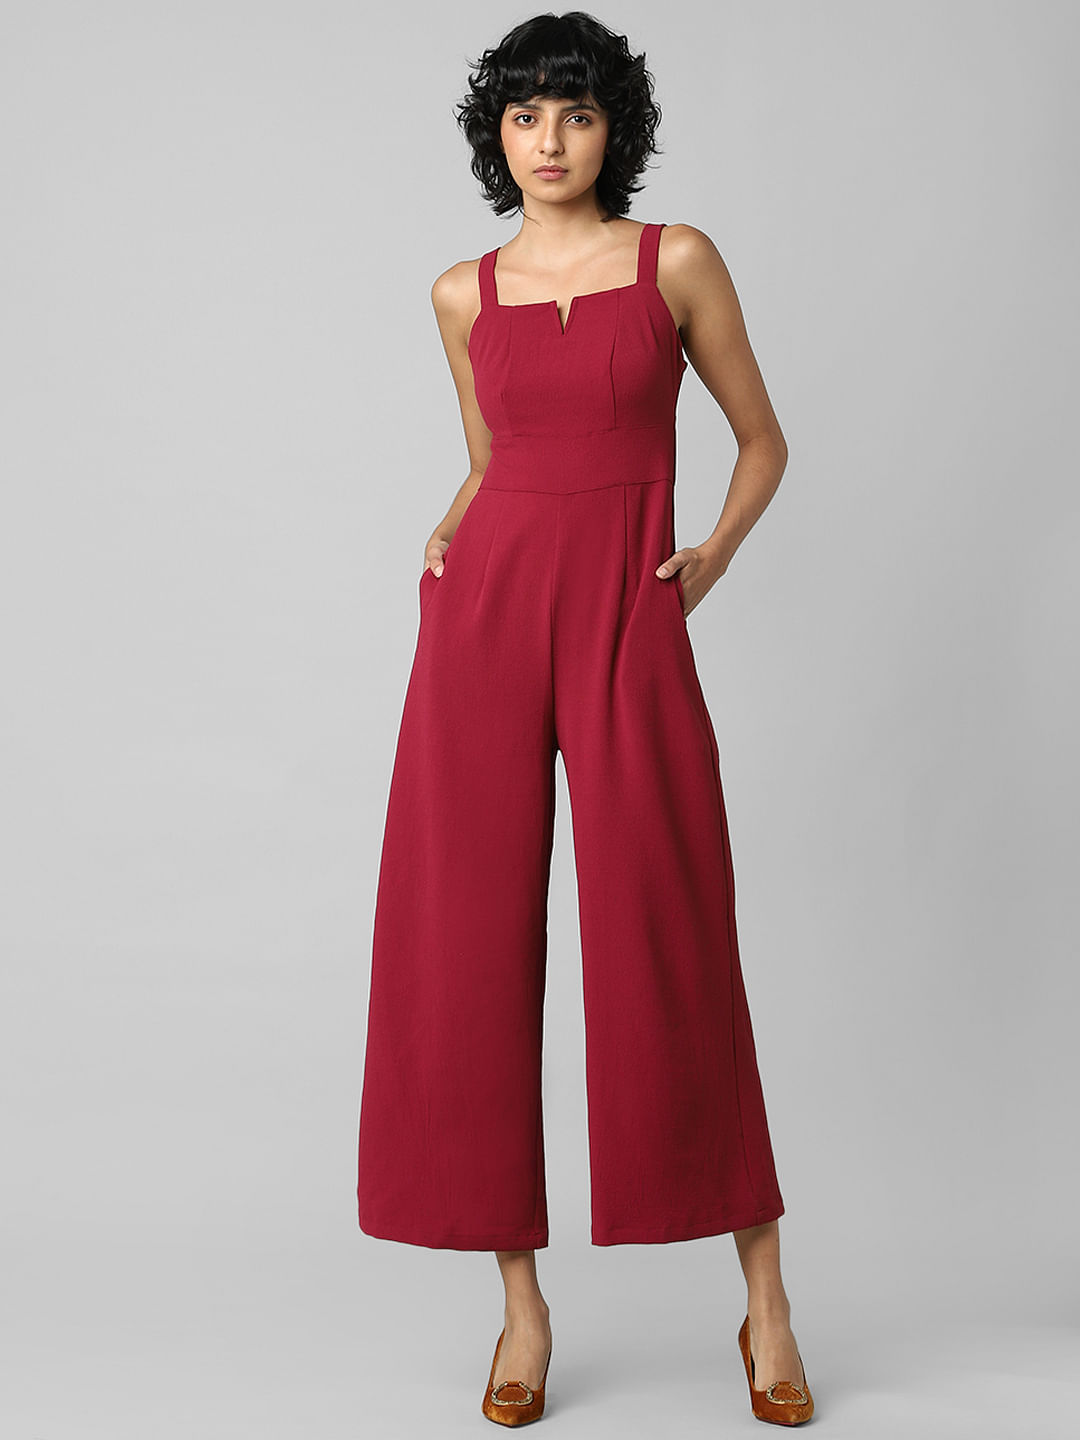 & Other Stories Sleeveless Flared Jumpsuit in Black Womens Clothing Jumpsuits and rompers Full-length jumpsuits and rompers 